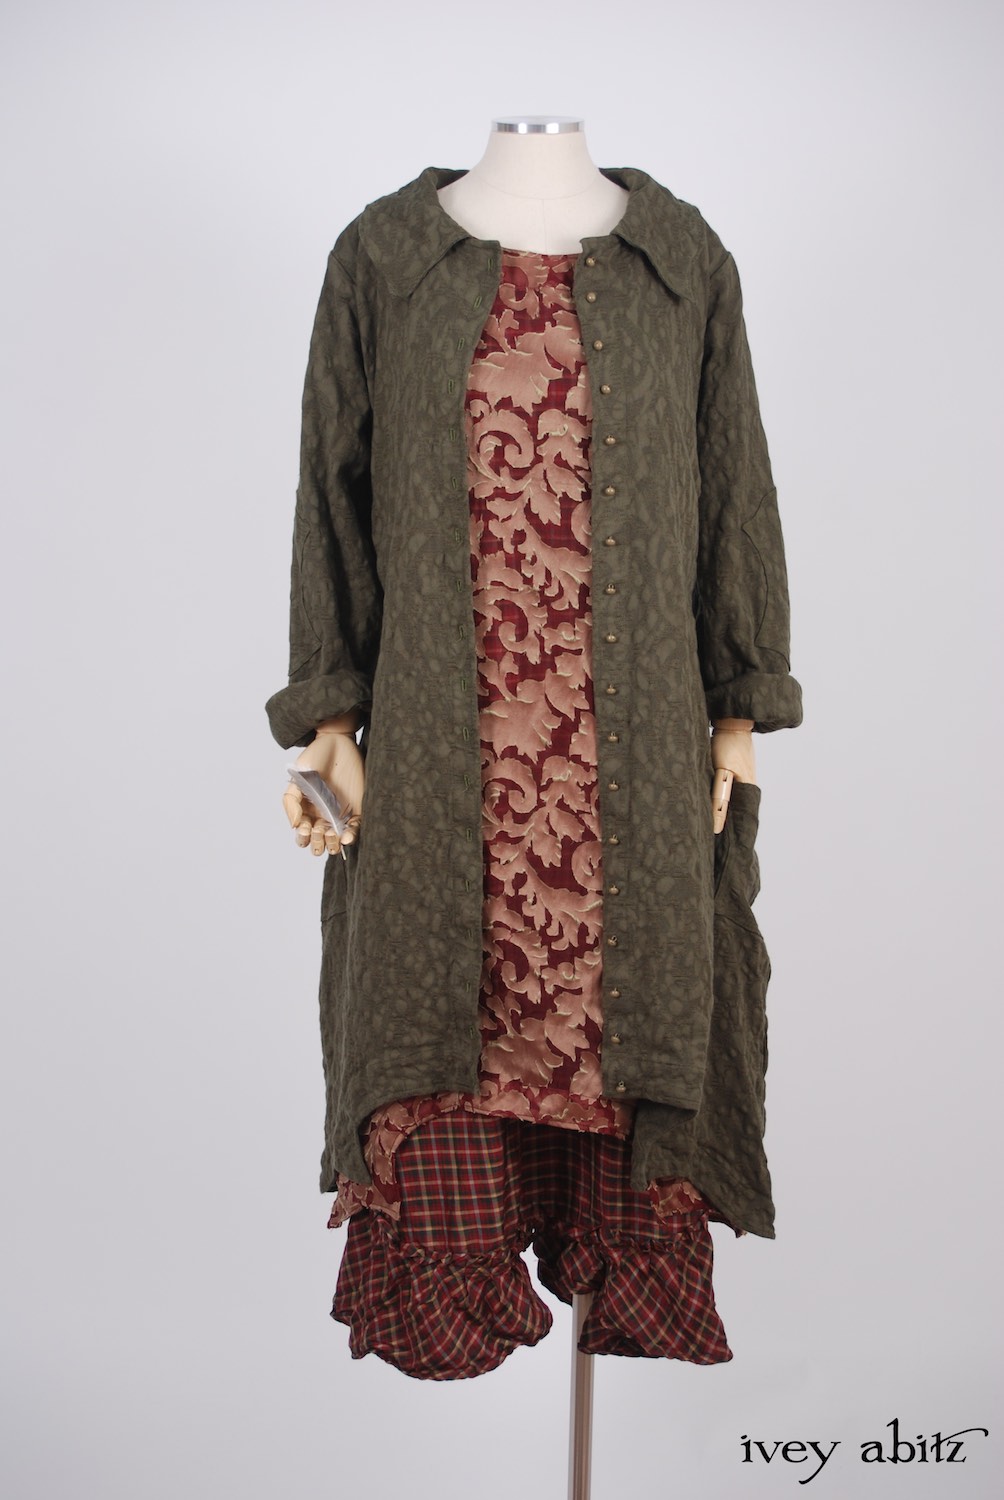 Ivey Abitz - Chittister Duster Coat in Morning Meadow Hemstitch Jacquard  - Chittister Frock in Peony Silk Organza  - Tilbrook Frock in Peony Washed Plaid Silk, High Water Length